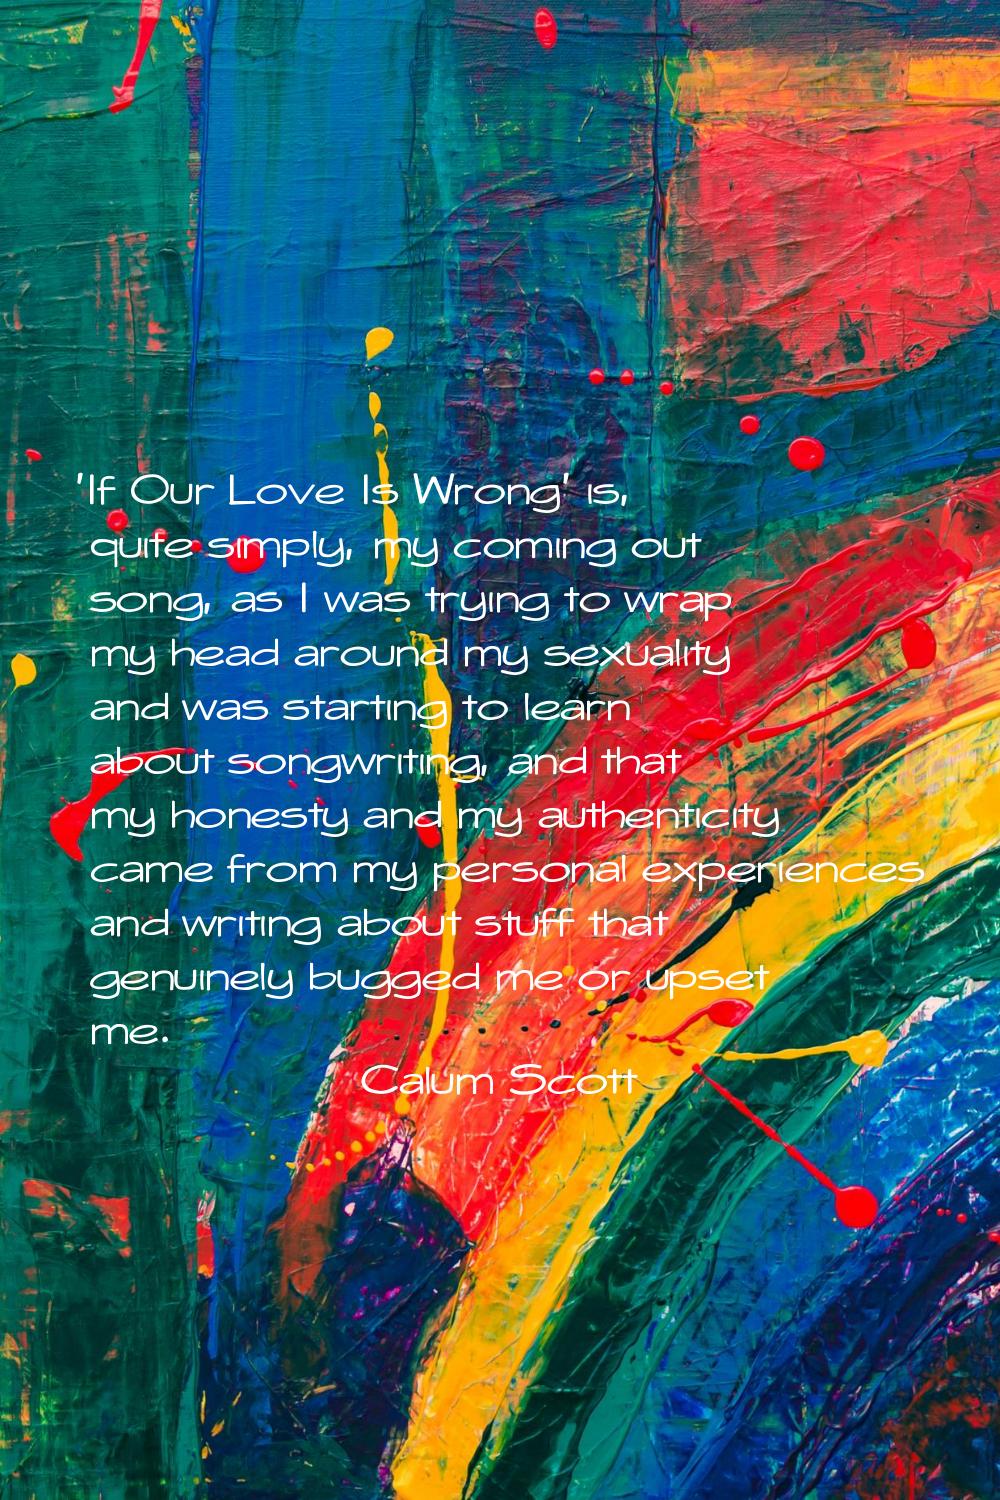 'If Our Love Is Wrong' is, quite simply, my coming out song, as I was trying to wrap my head around